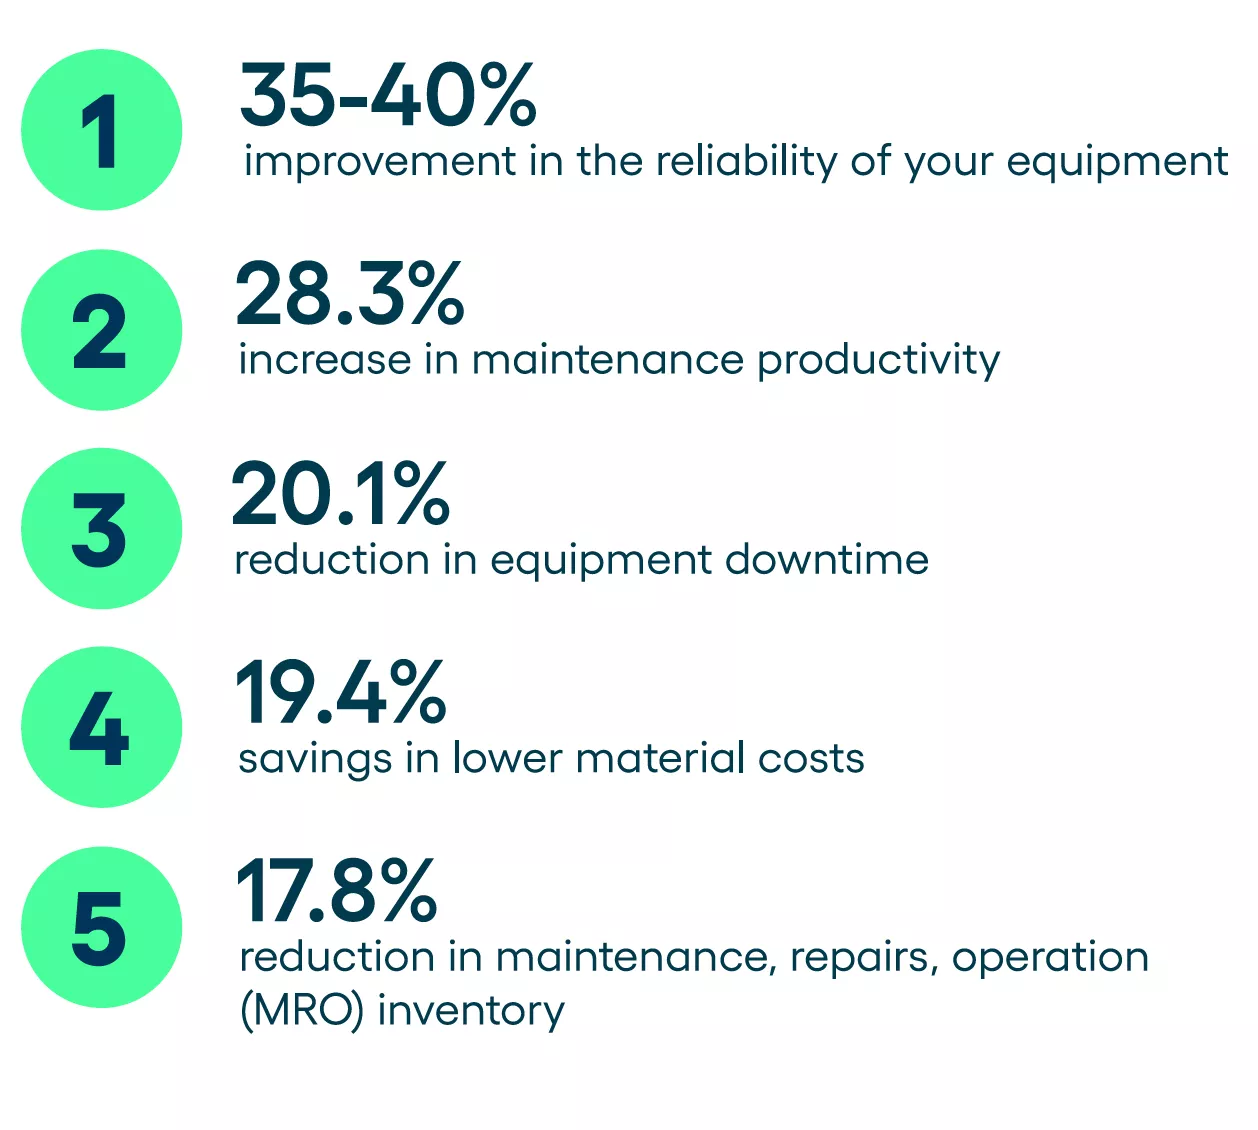 35-40% improvement in reliability of your equipment. 28.3% increase in maintenance productivity. 20.1% reduction in equipment downtime. 19.4% savings in lower material costs. 17.8% reduction in maintenance, repairs, operation (MRO) inventory.